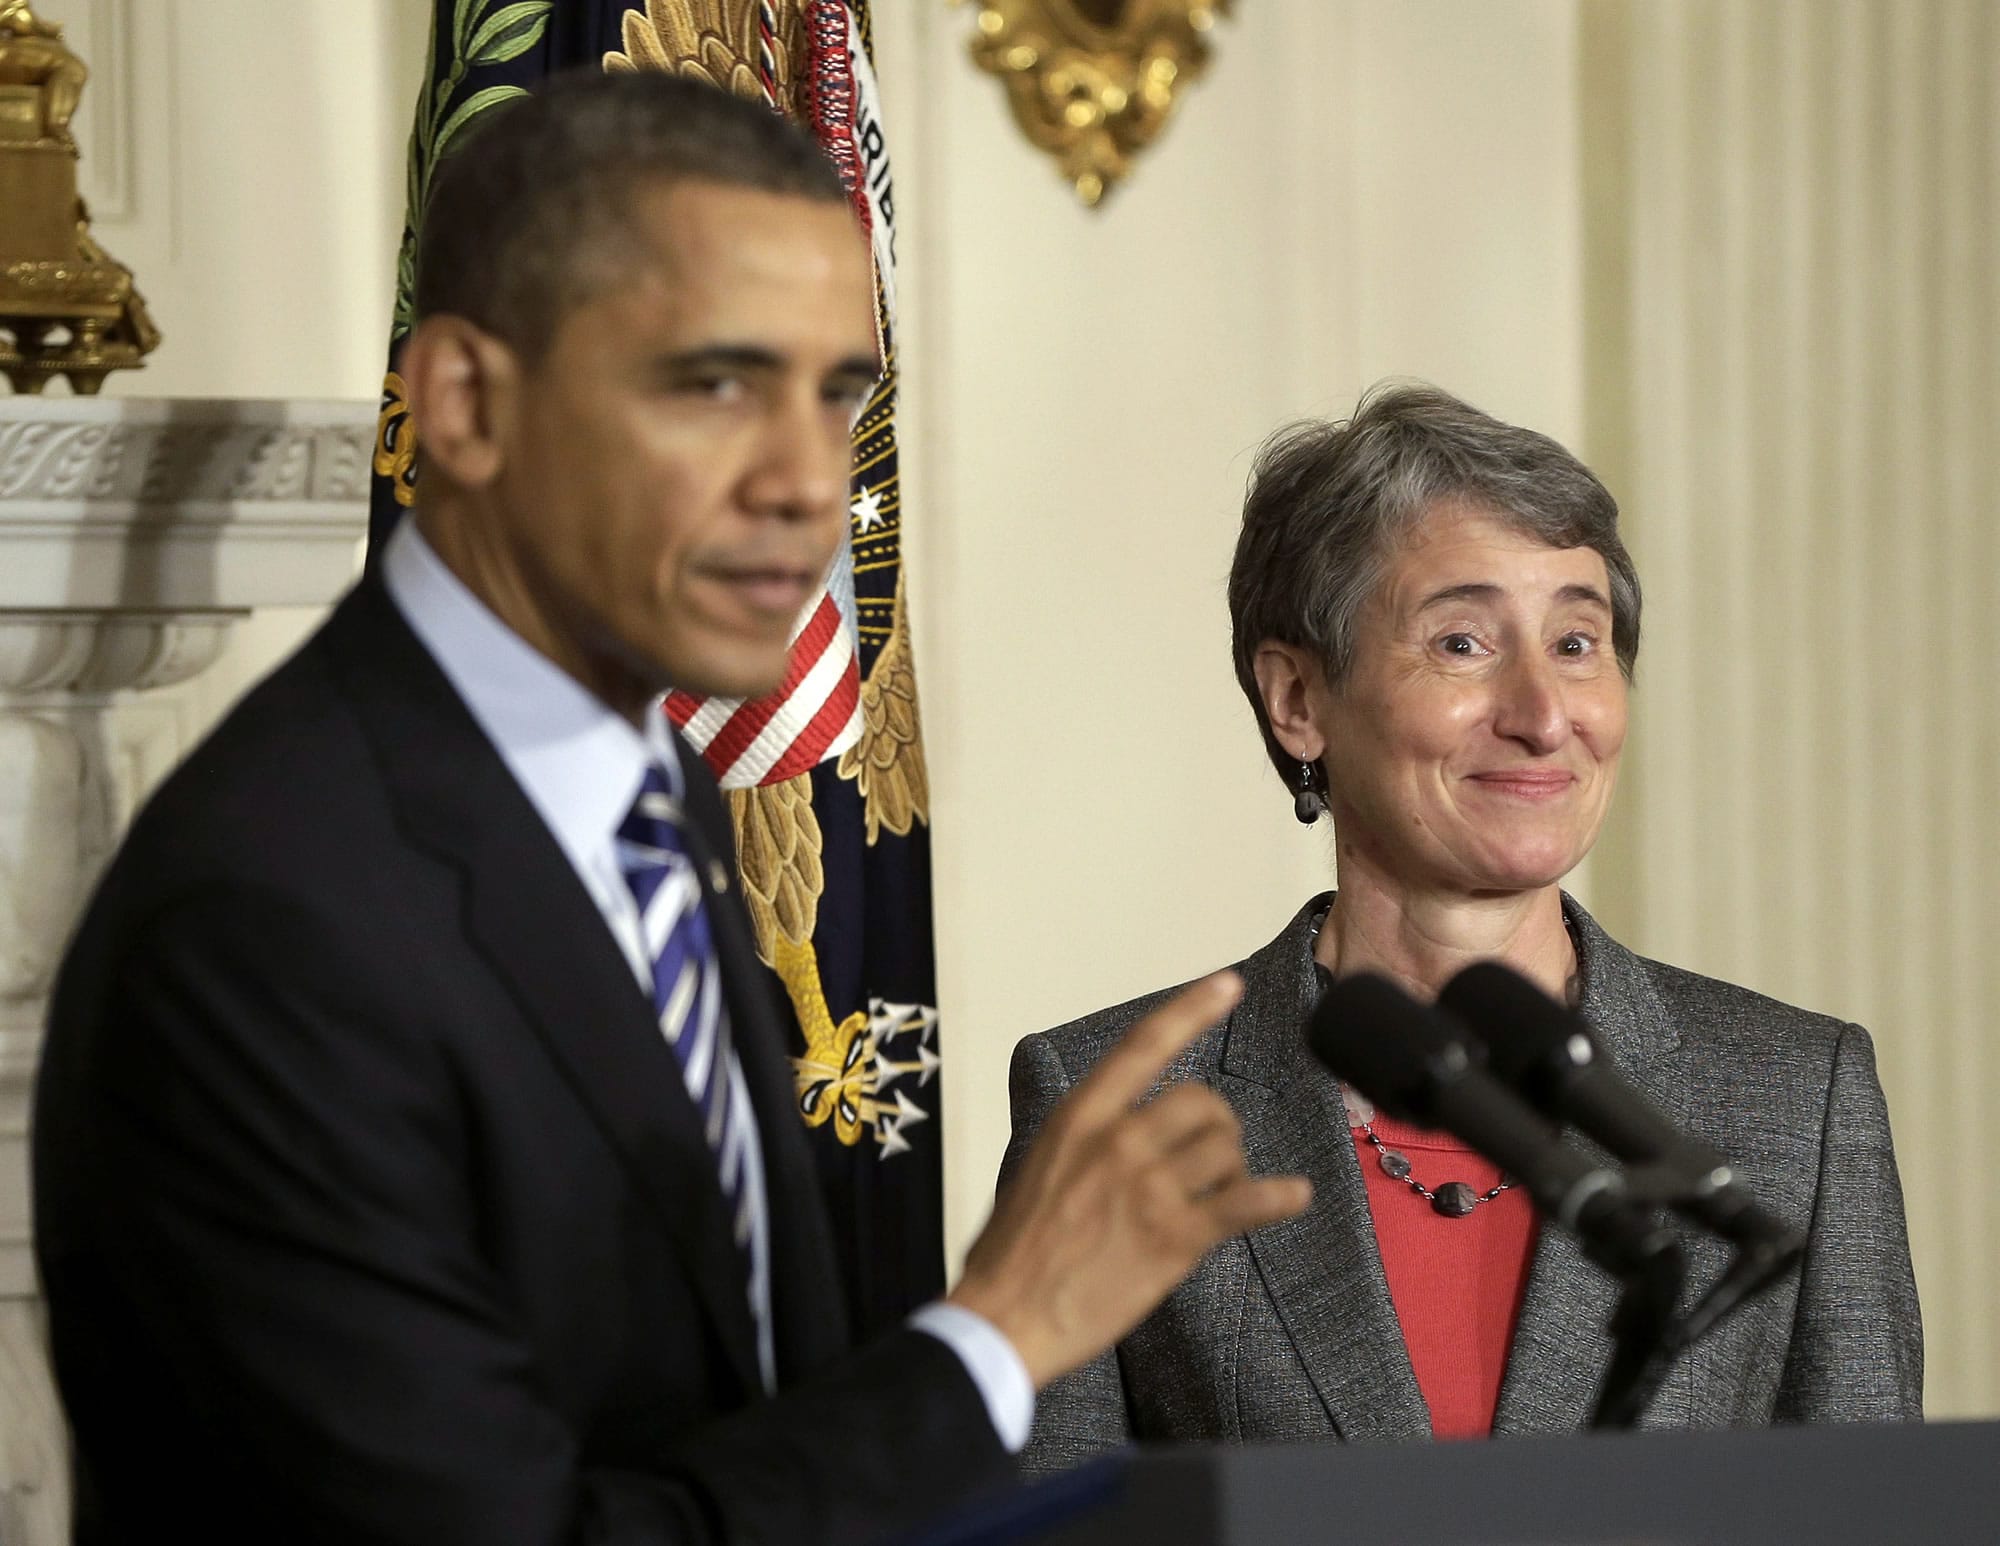 President Barack Obama points towards REI CEO Sally Jewell as he announces that he is nominating her as the next interior secretary replacing outgoing Interior Secretary Ken Salazar,in the State Dining Room of the White House in Washington in February.